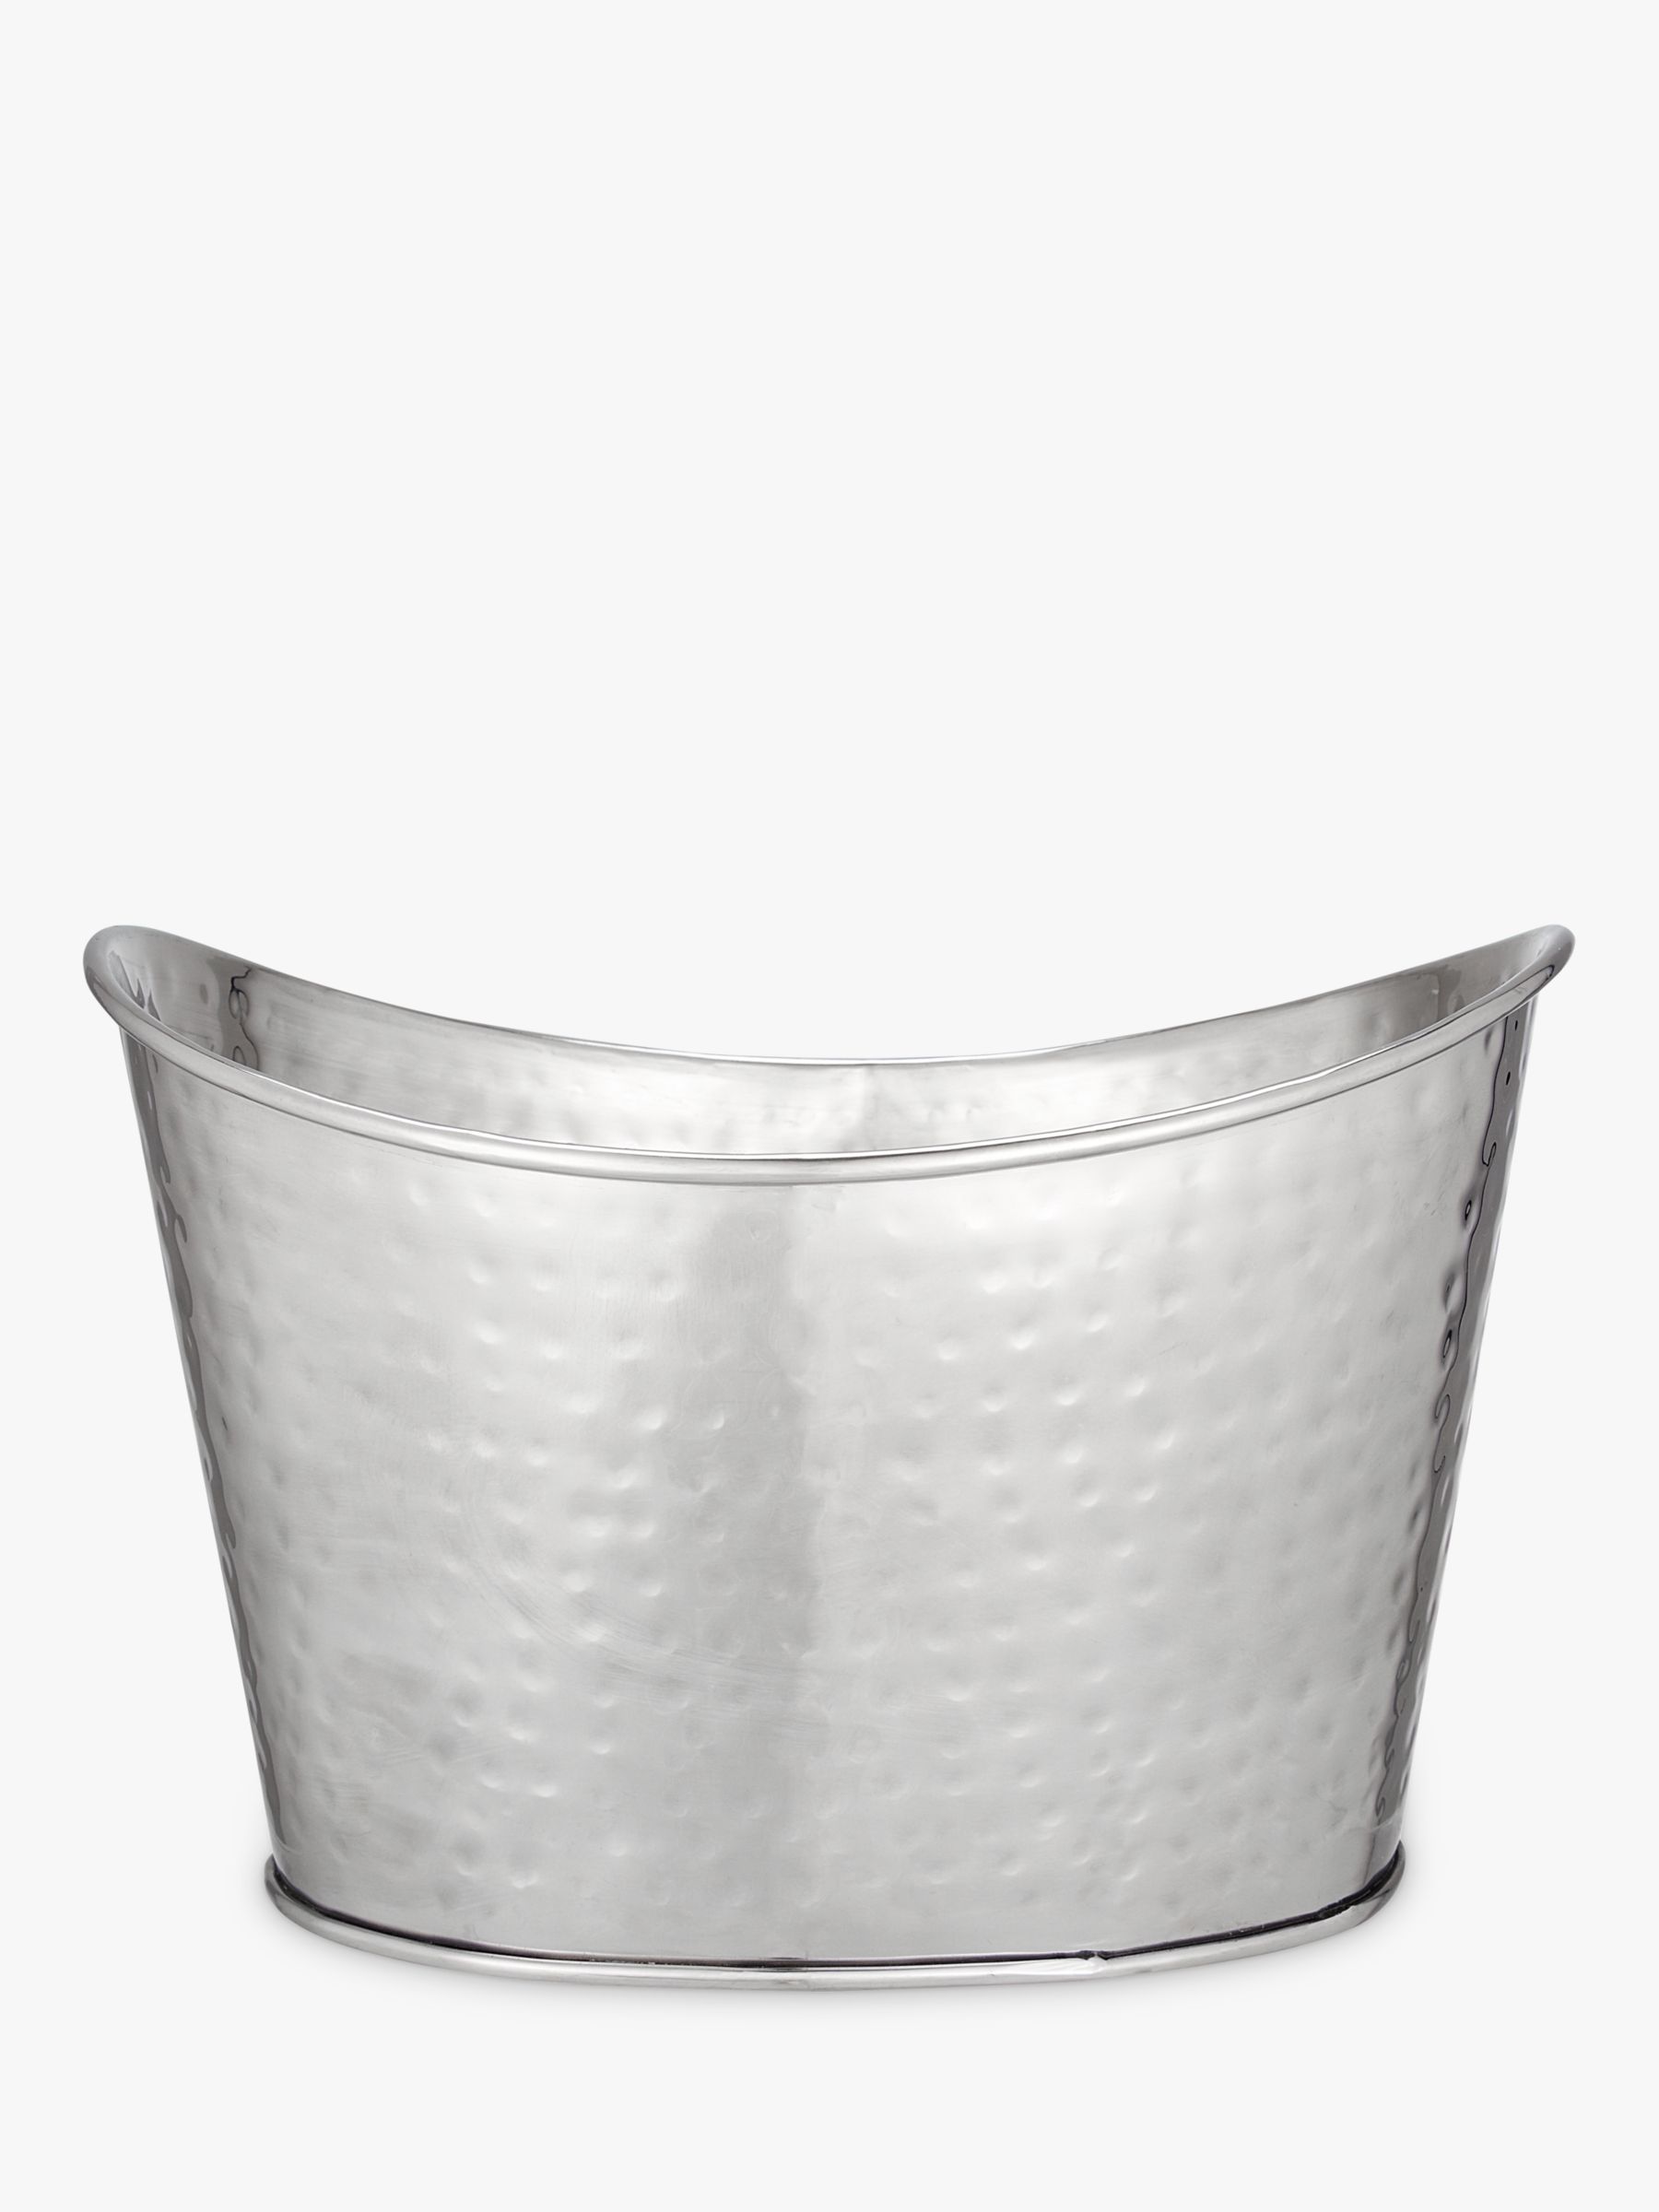 John Lewis Hammered Stainless Steel Double Champagne Ice Bucket